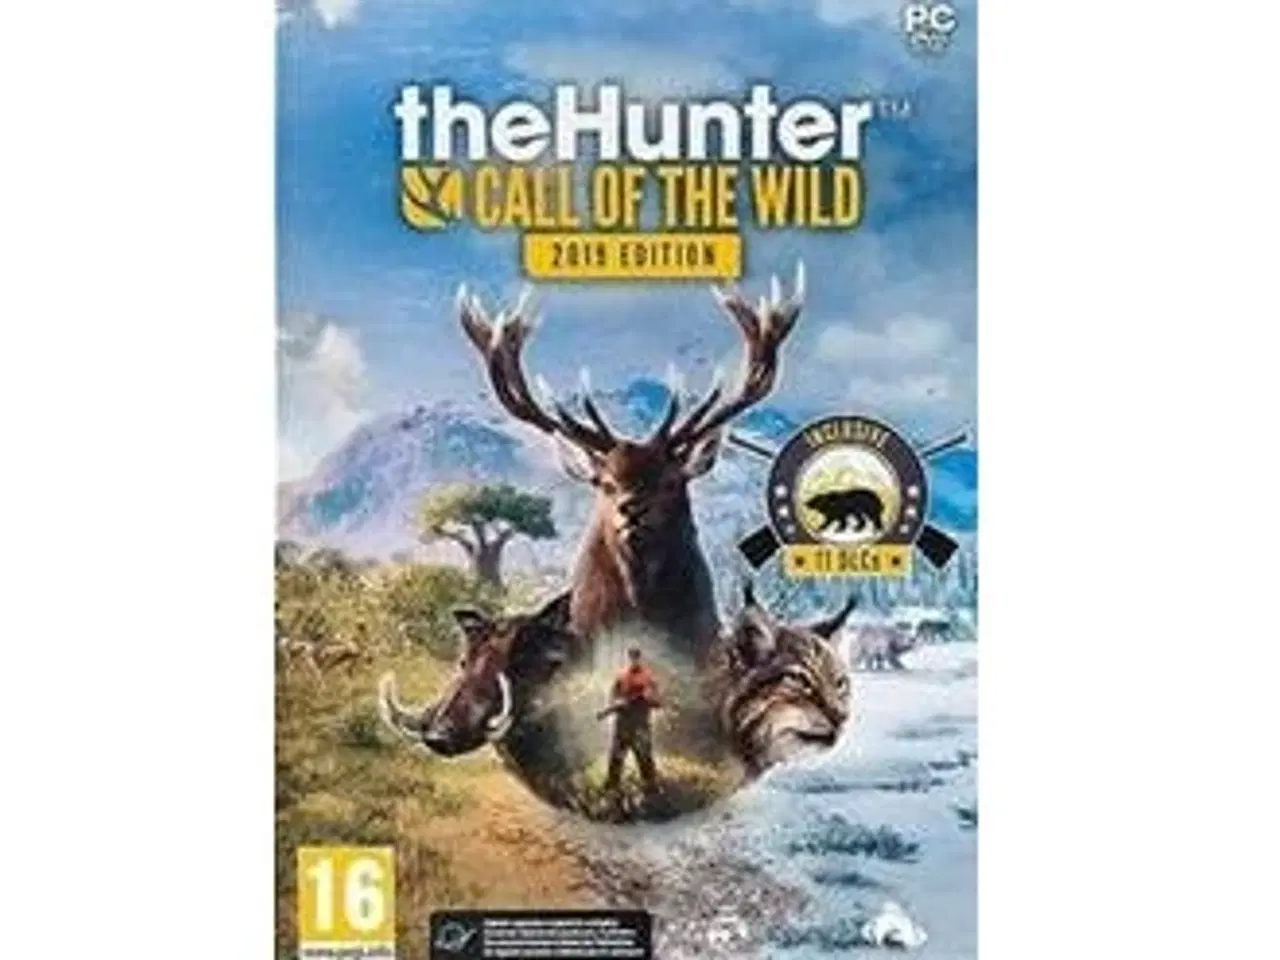 Billede 1 - theHunter: Call of the Wild